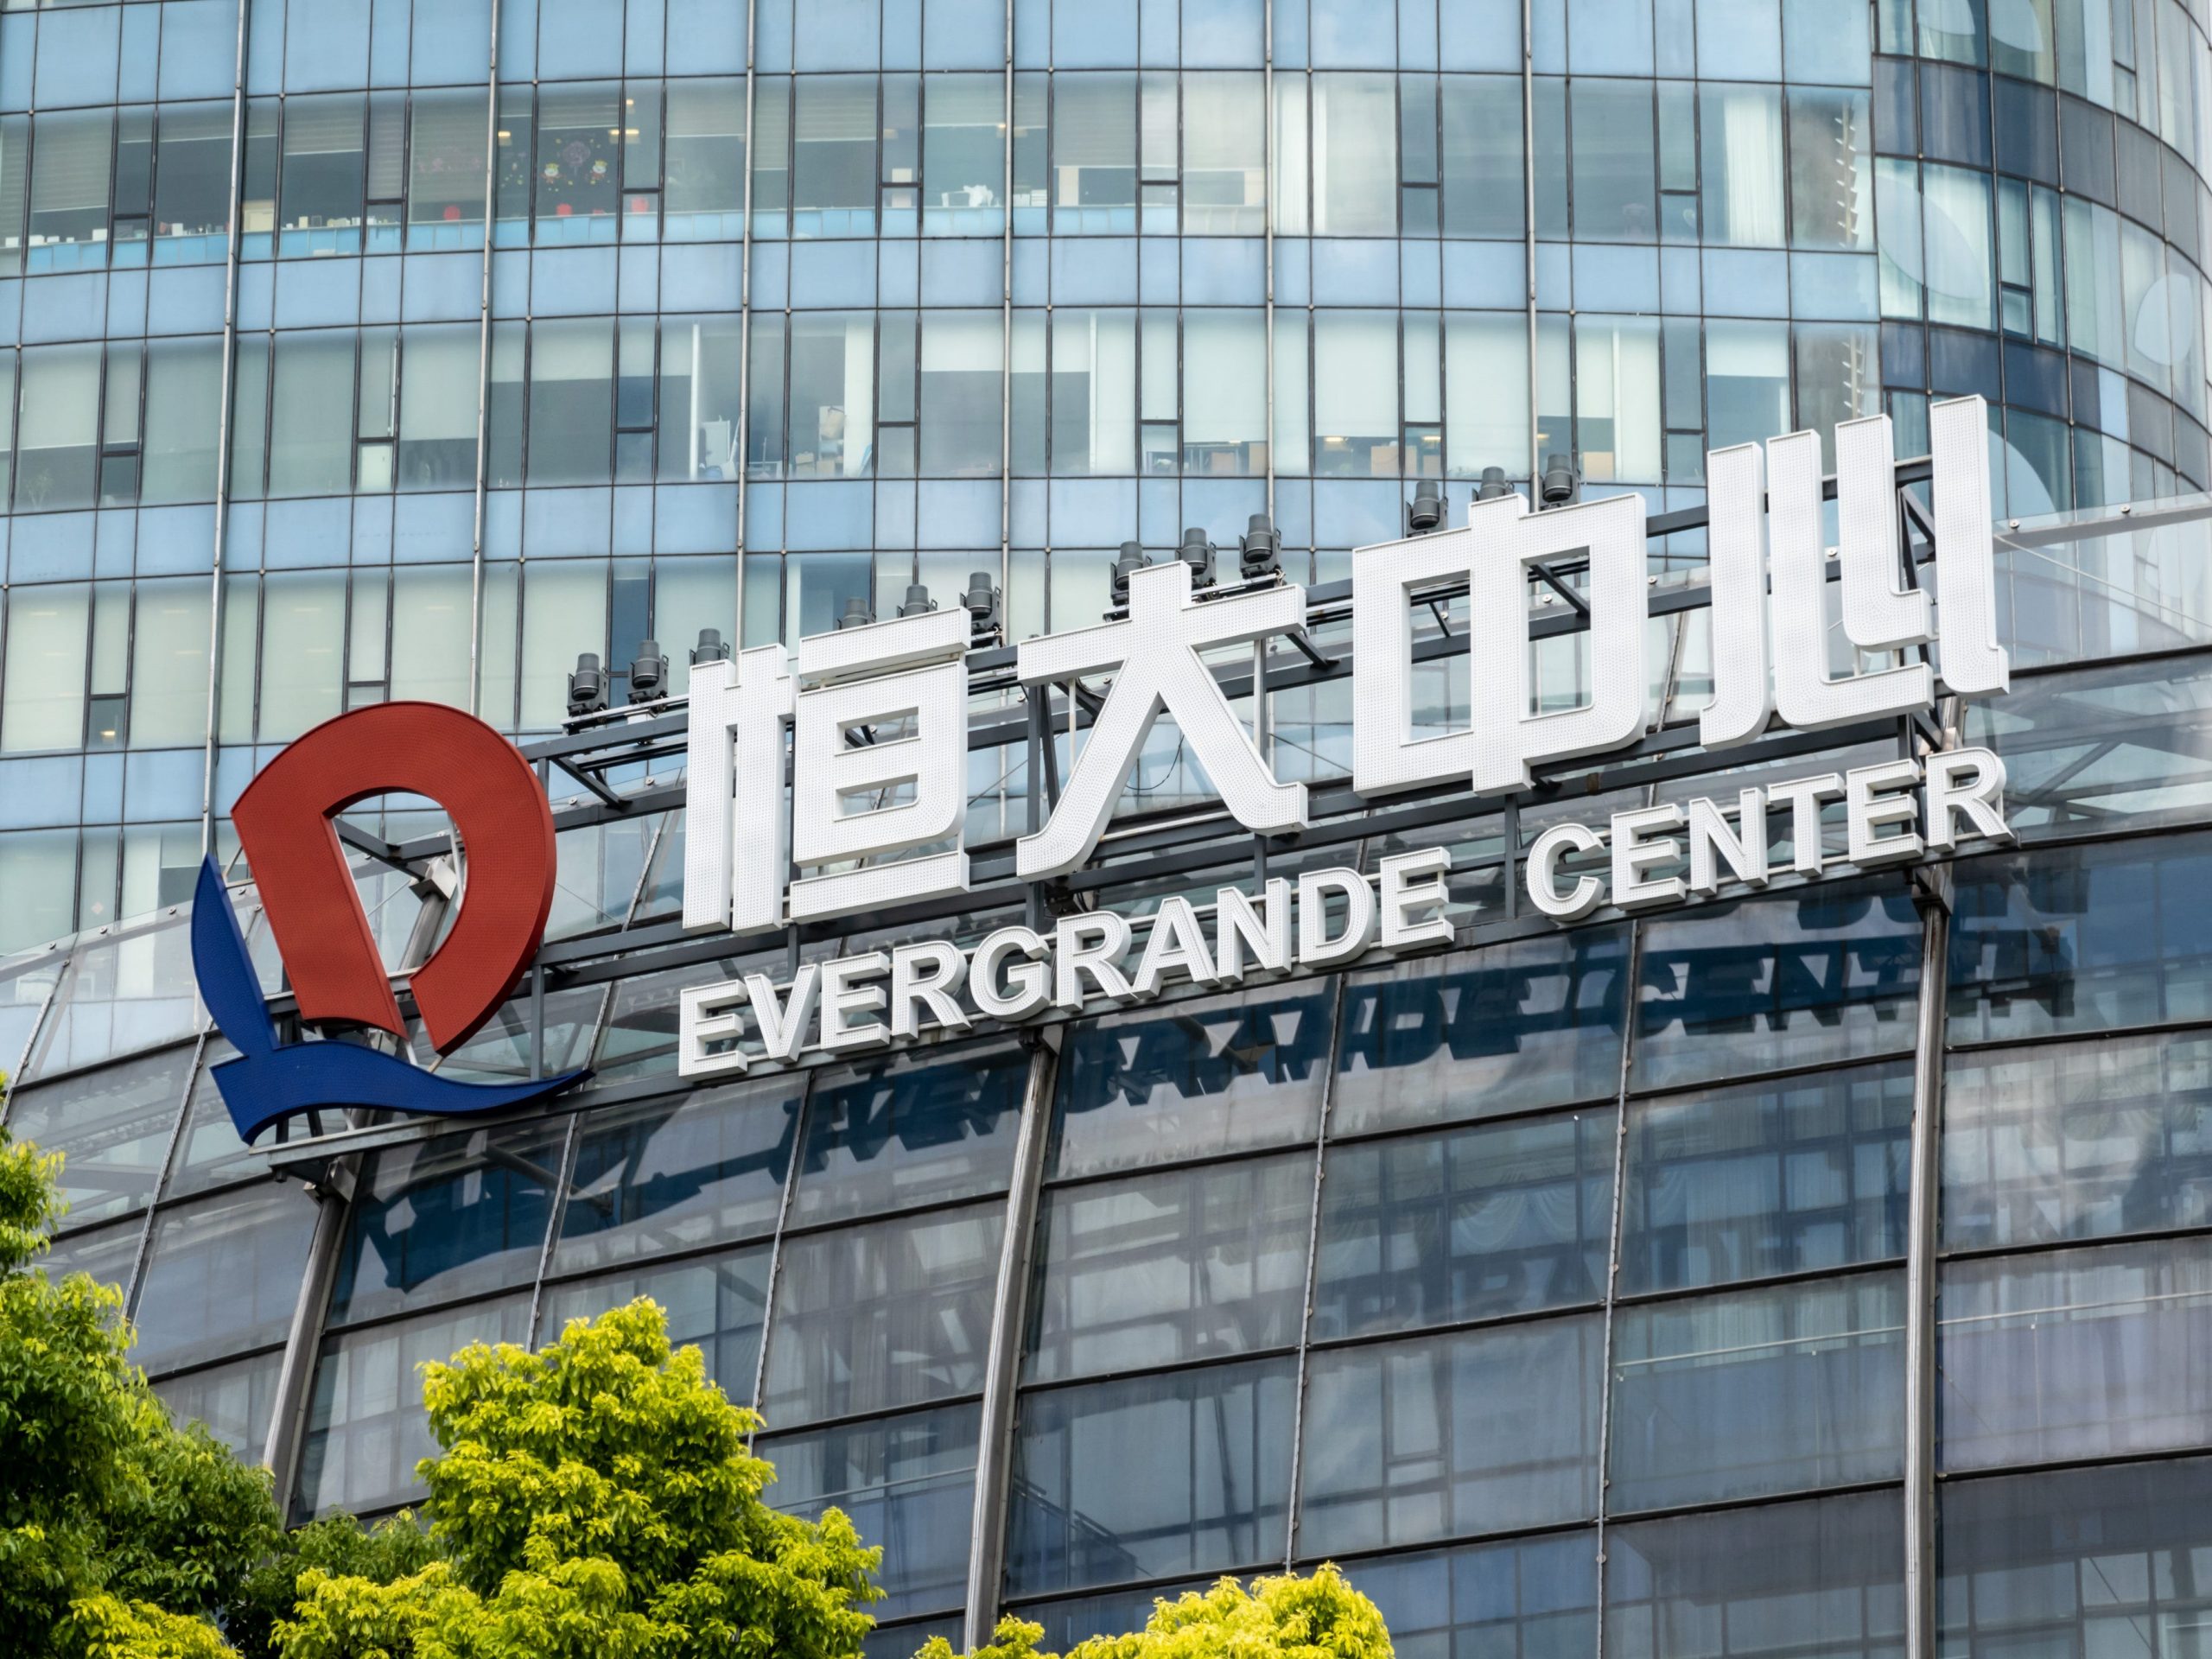 A view of the Evergrande Center, which hosts the regional HQ of Evergrande Group, in Shanghai, China Thursday, Sept. 16, 2021.